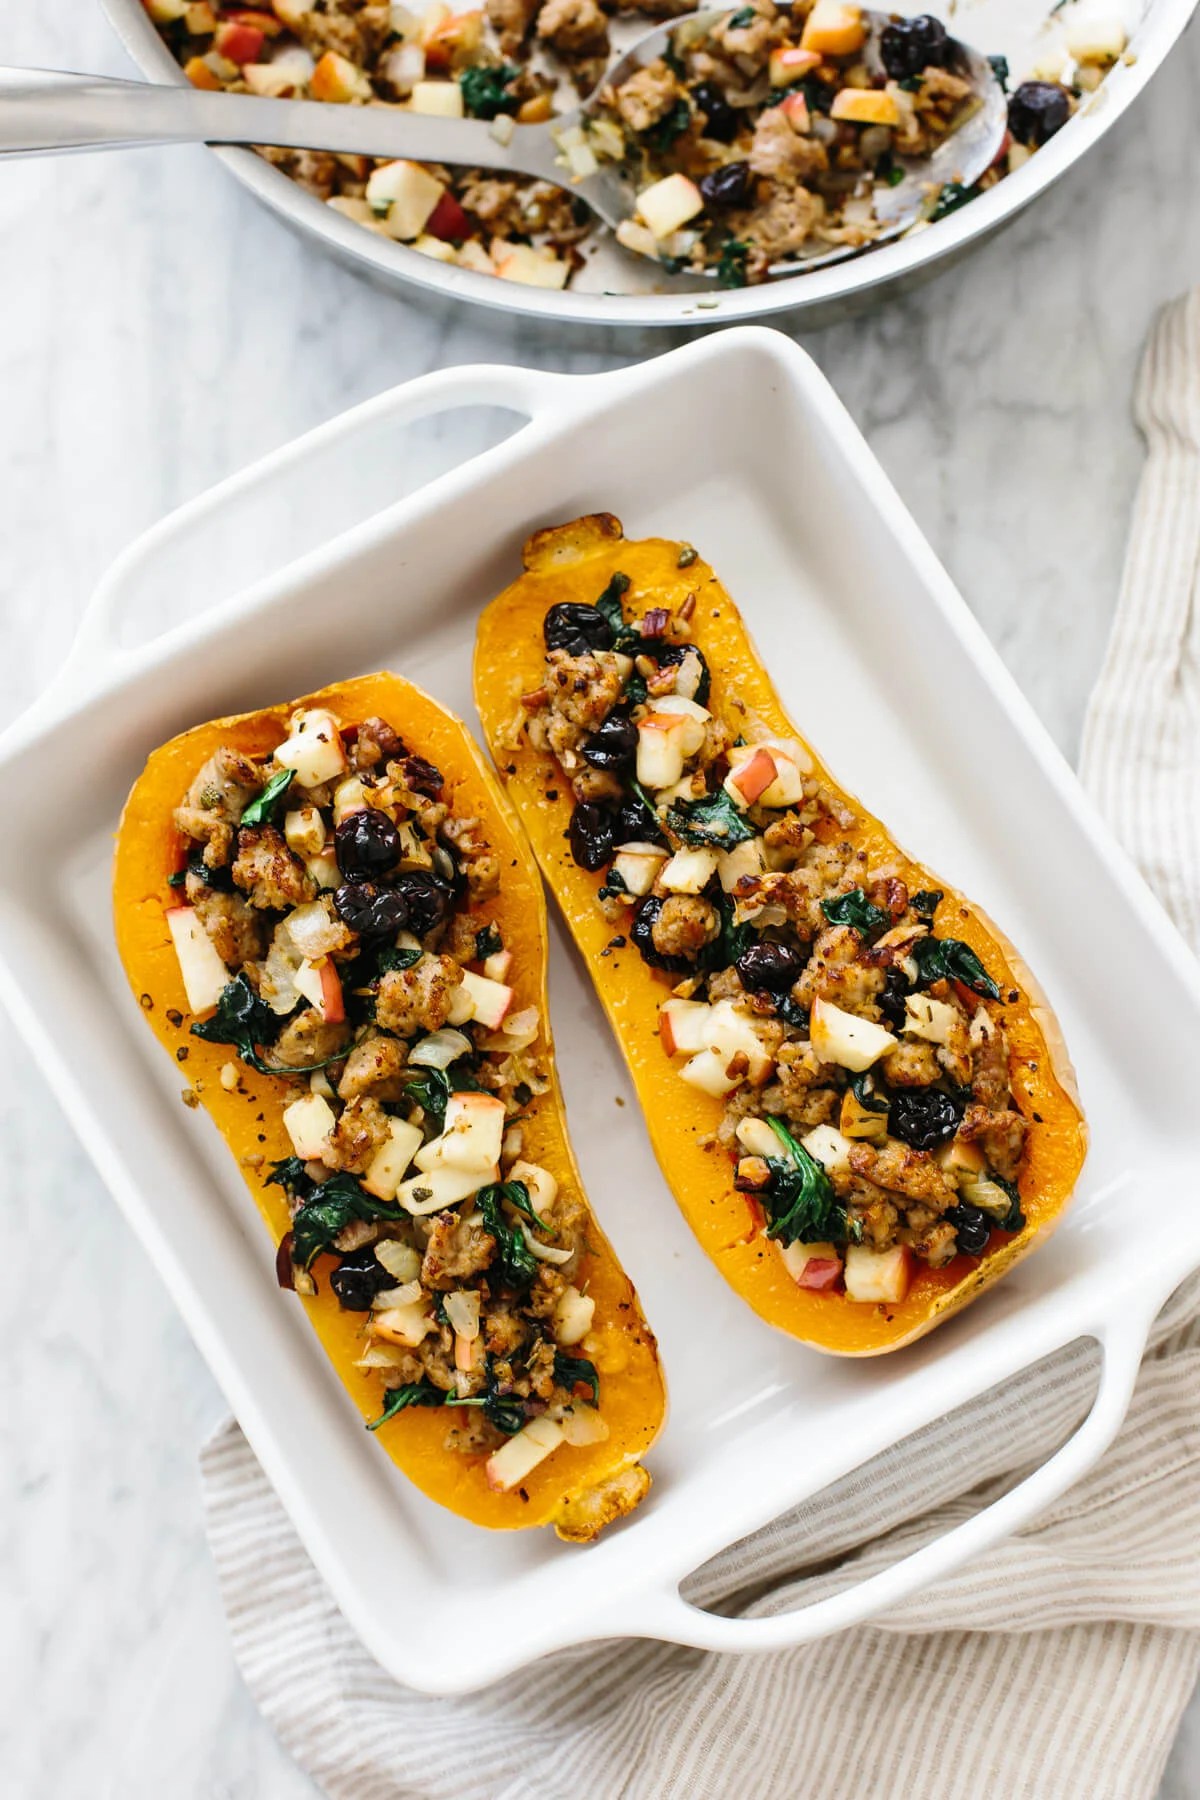 Butternut squash filled with sausage apples and other ingredients in a baking dish.